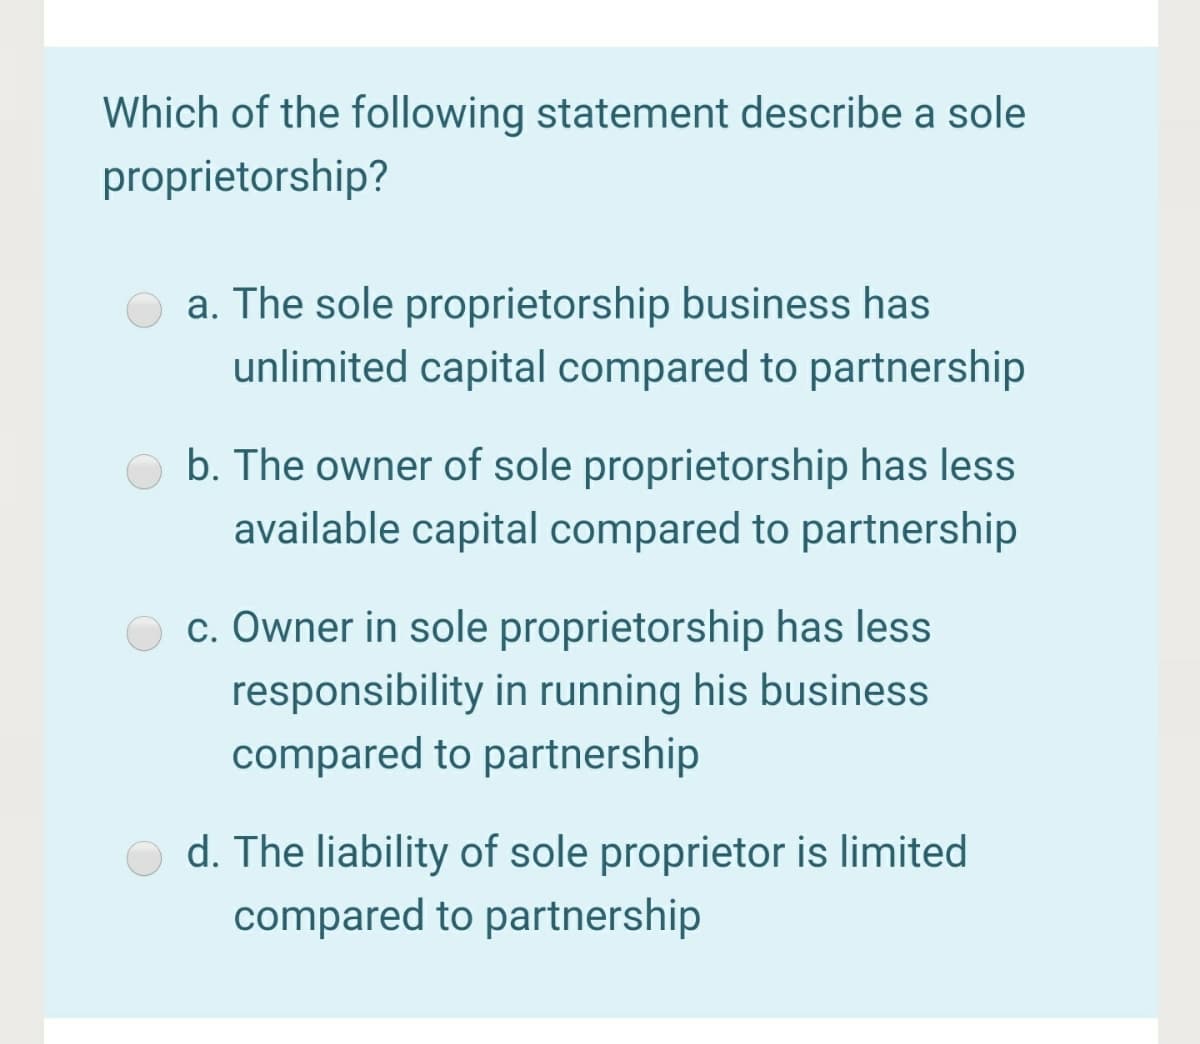 Which of the following statement describe a sole
proprietorship?
a. The sole proprietorship business has
unlimited capital compared to partnership
b. The owner of sole proprietorship has less
available capital compared to partnership
c. Owner in sole proprietorship has less
responsibility in running his business
compared to partnership
d. The liability of sole proprietor is limited
compared to partnership
